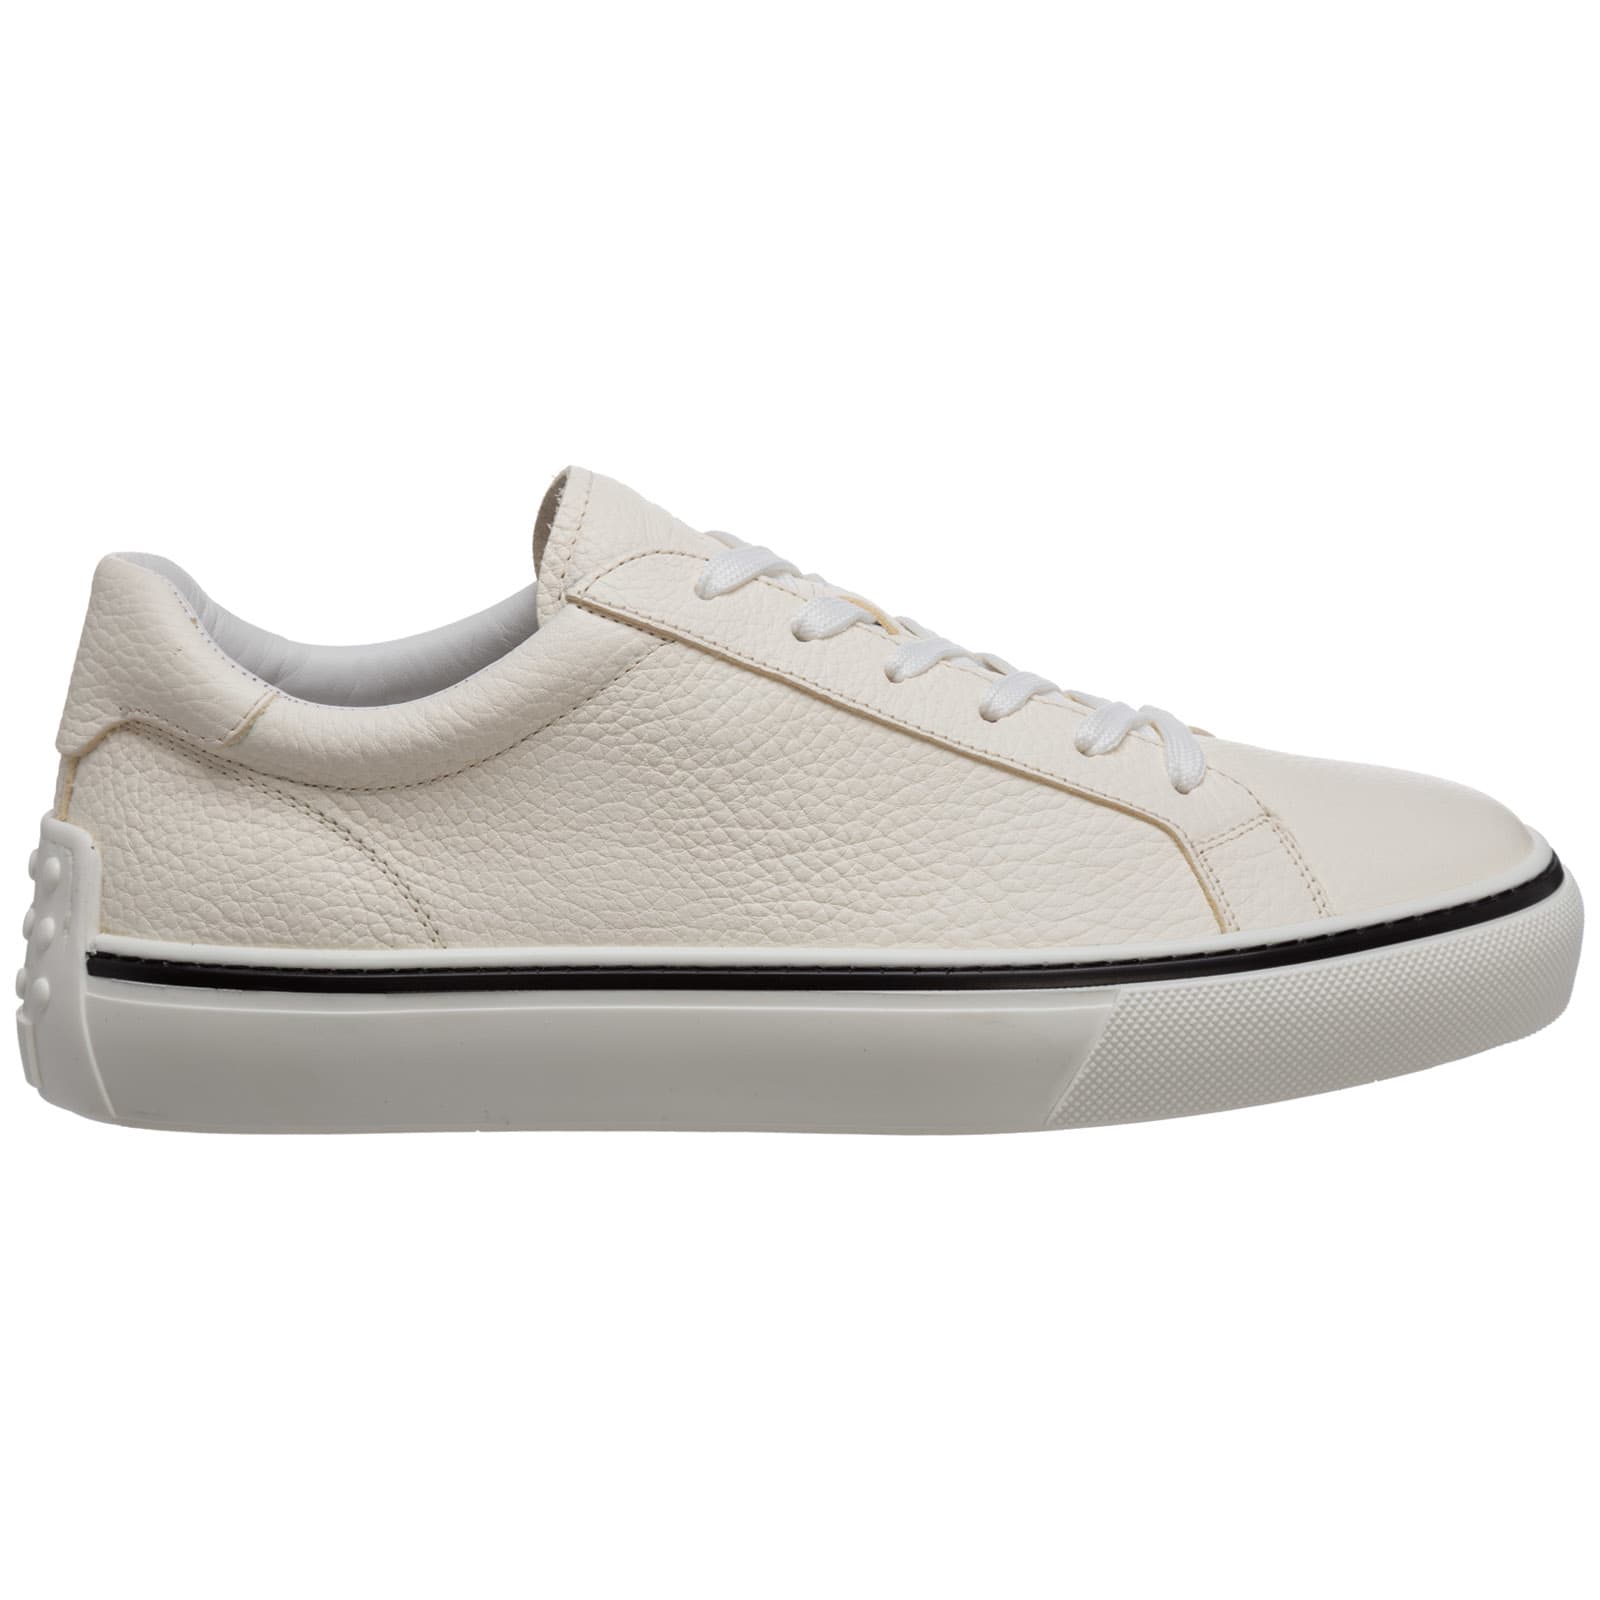 Tods Tournament Sneakers